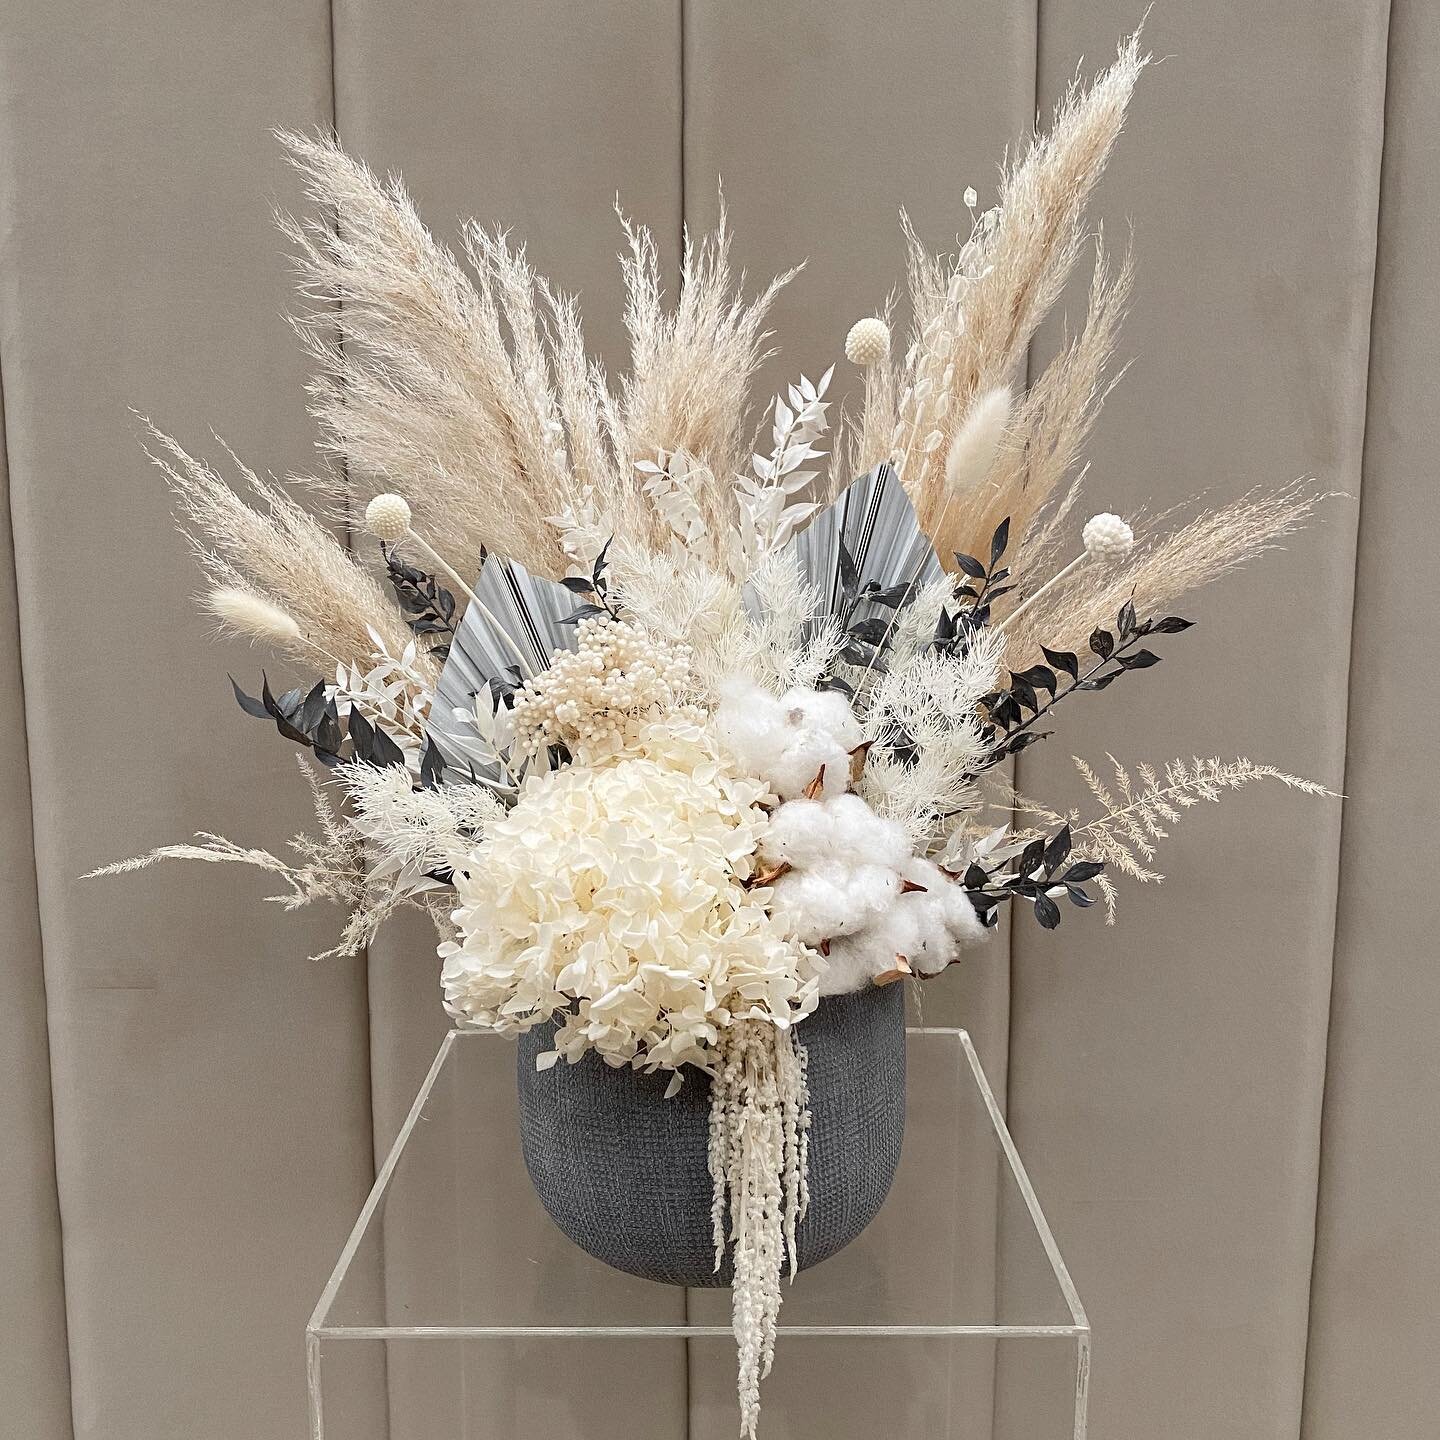 🎉 GIVEAWAY TIME 🎉

To help everyone get through the last few weeks of lockdown, we thought we would bring some cheer &amp; give away this one of a kind, hand crafted dried flower arrangement to one lucky person.

As part of the prize we will also b